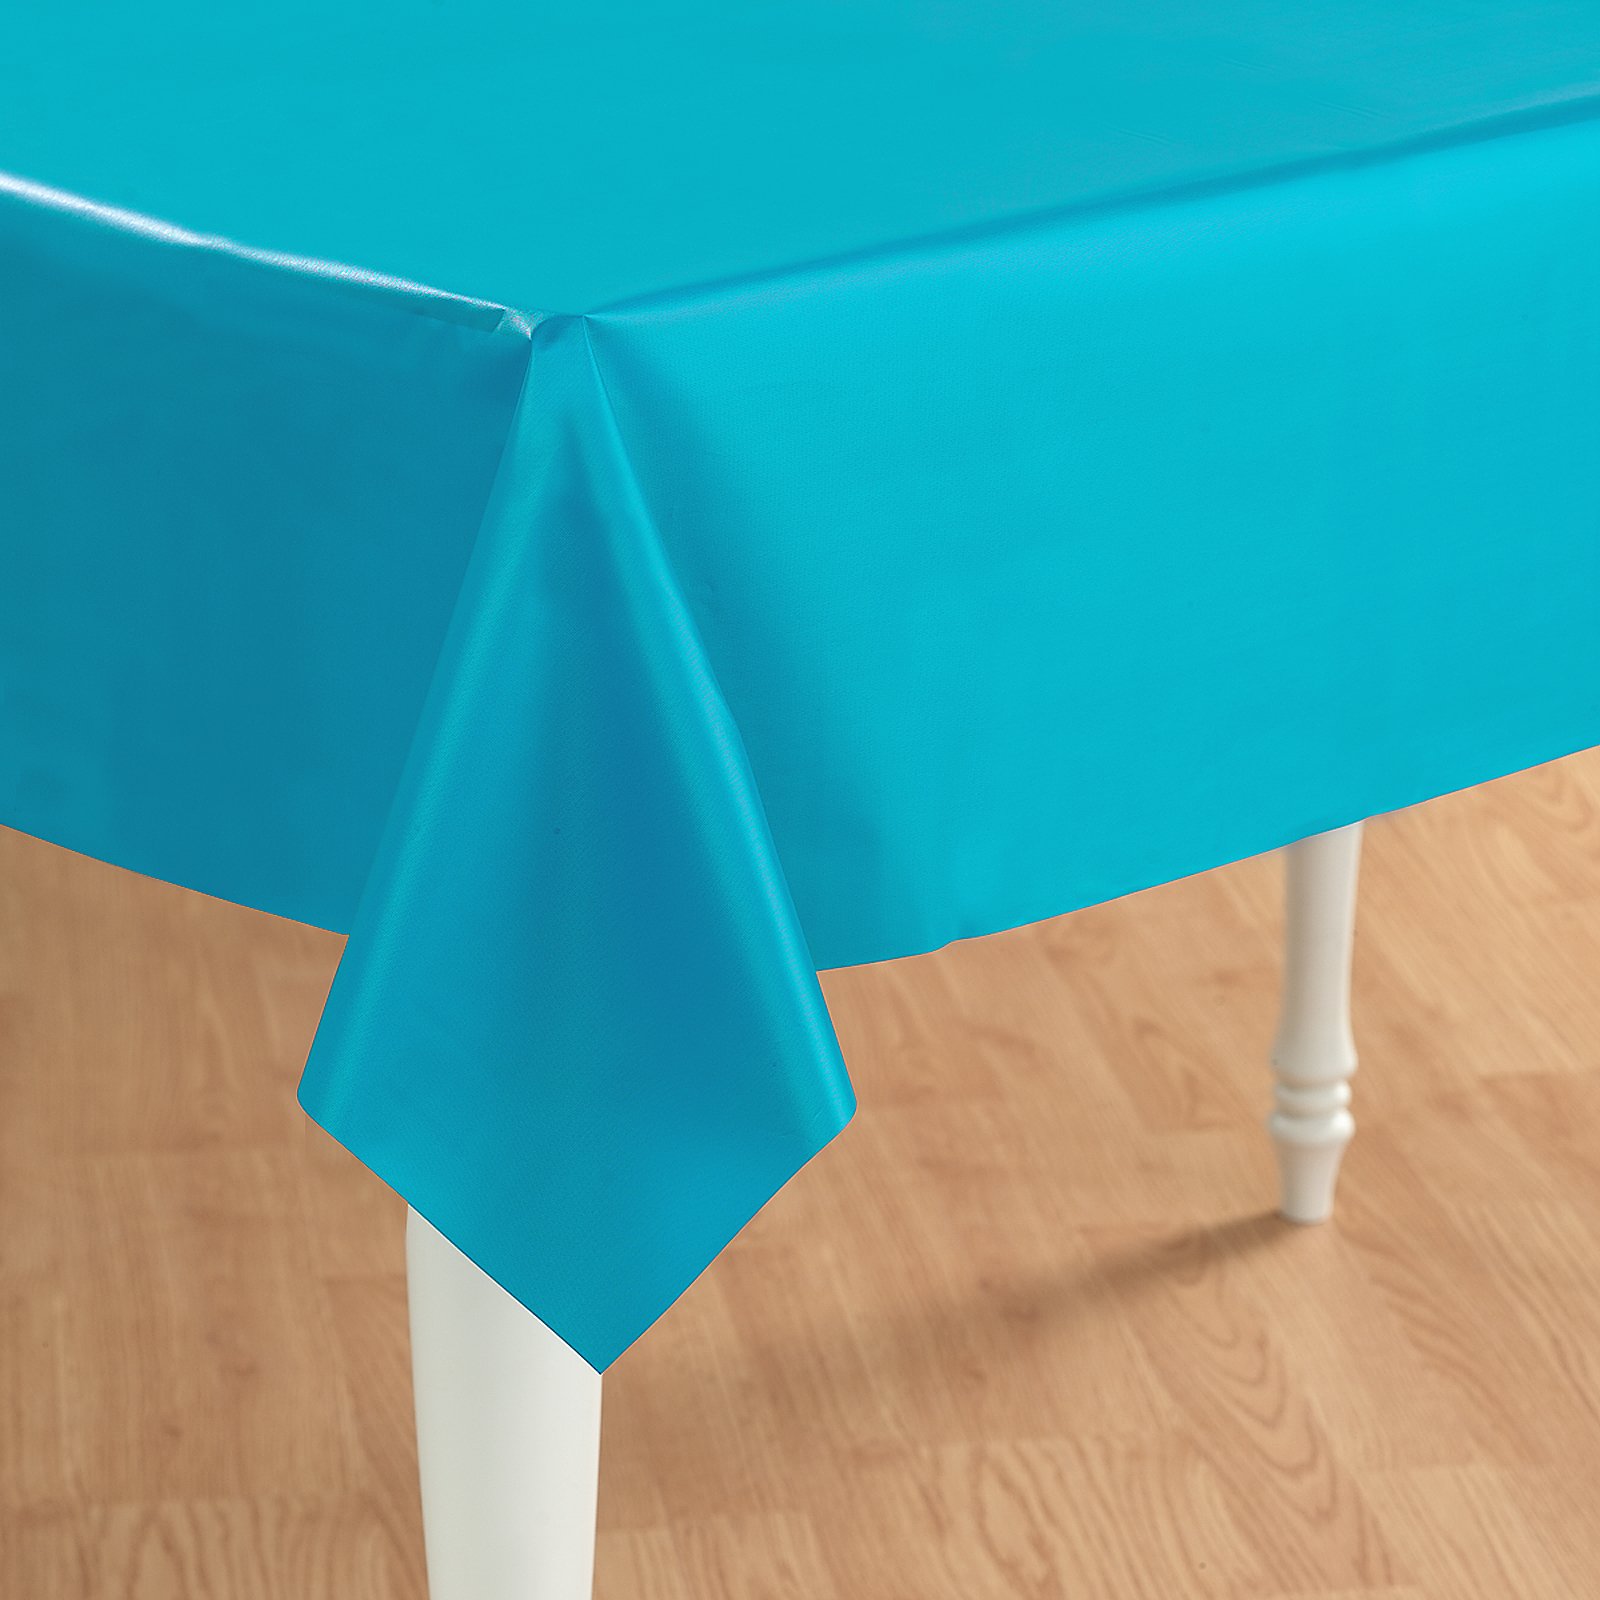 Bermuda Blue (Turquoise) Plastic Tablecover - Click Image to Close